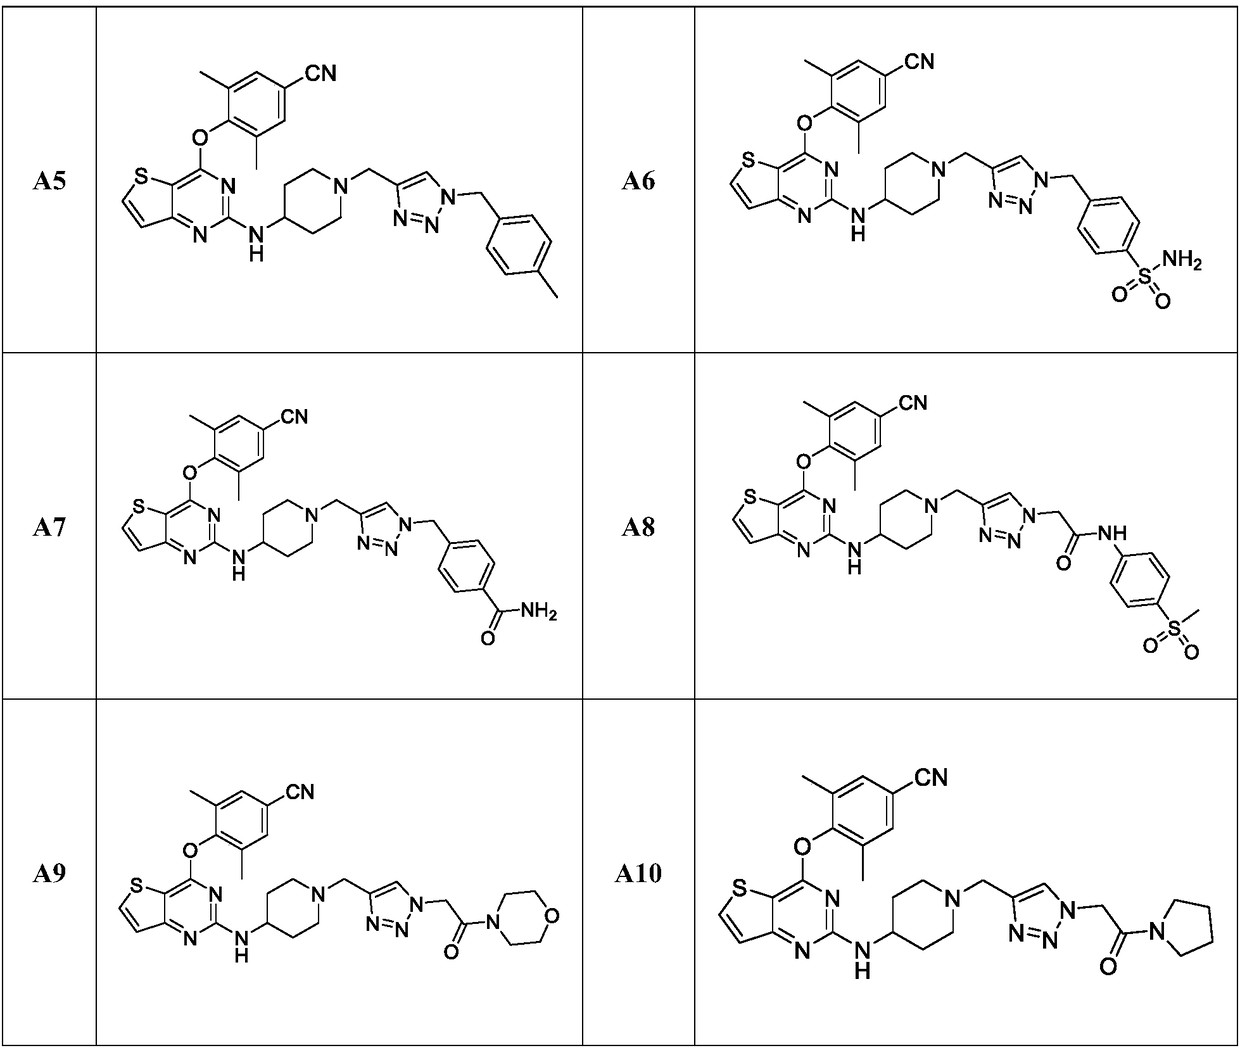 Triazole-ring-containing diaryl pyrimidine HIV-1 inhibitor as well as preparation method and application of triazole-ring-containing diaryl pyrimidine HIV-1 inhibitor